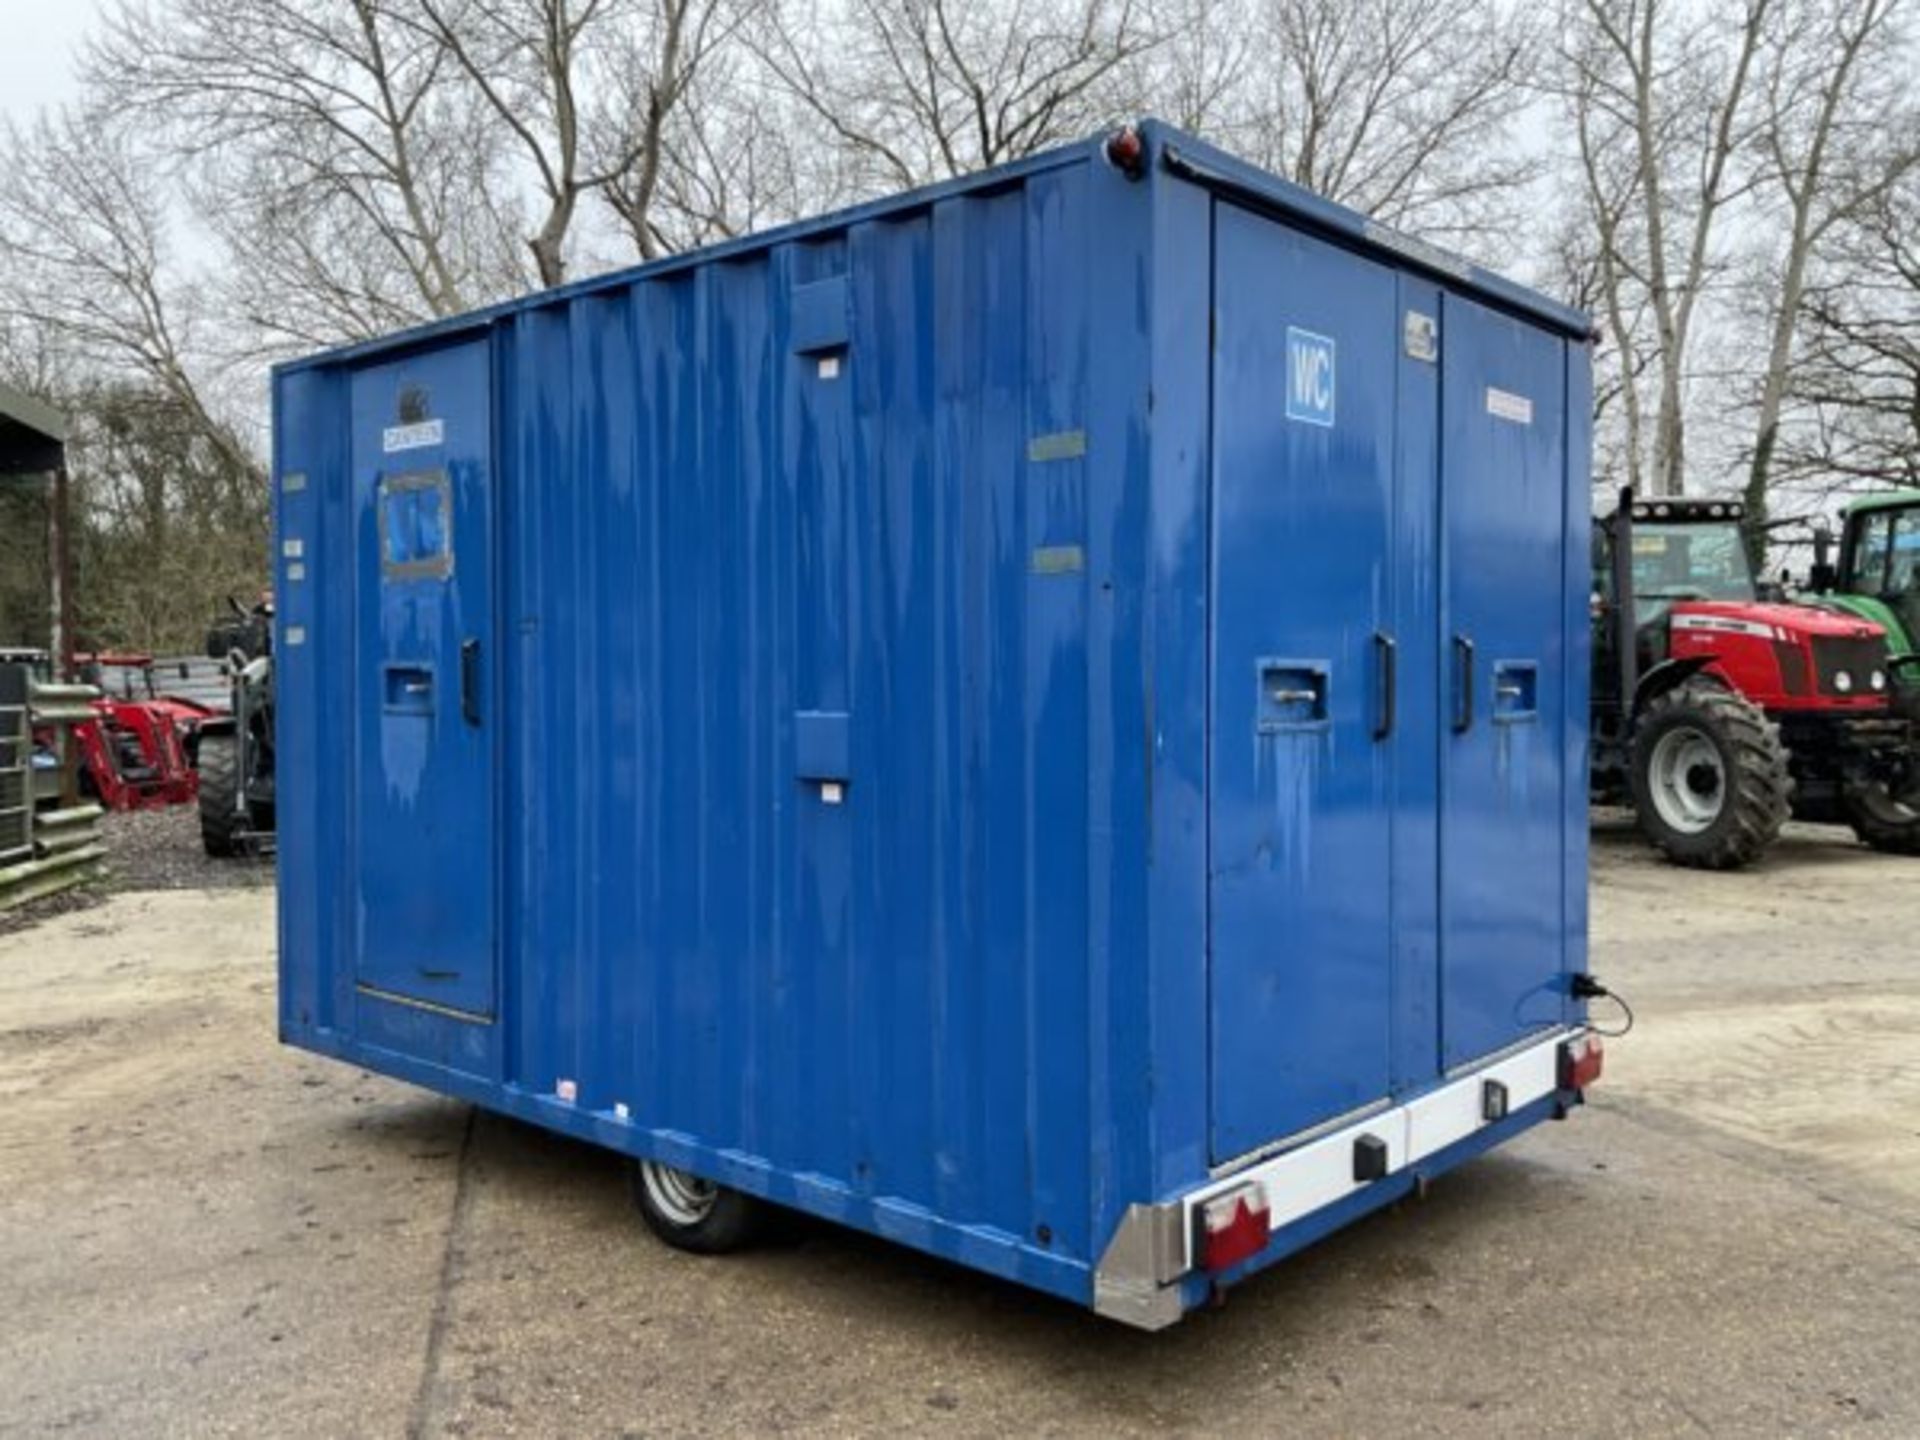 BOSS CABIN WELFARE UNIT WITH KITCHEN/DINING AREA, W/C, AND RED BOX POWER GENERATOR - Image 6 of 10